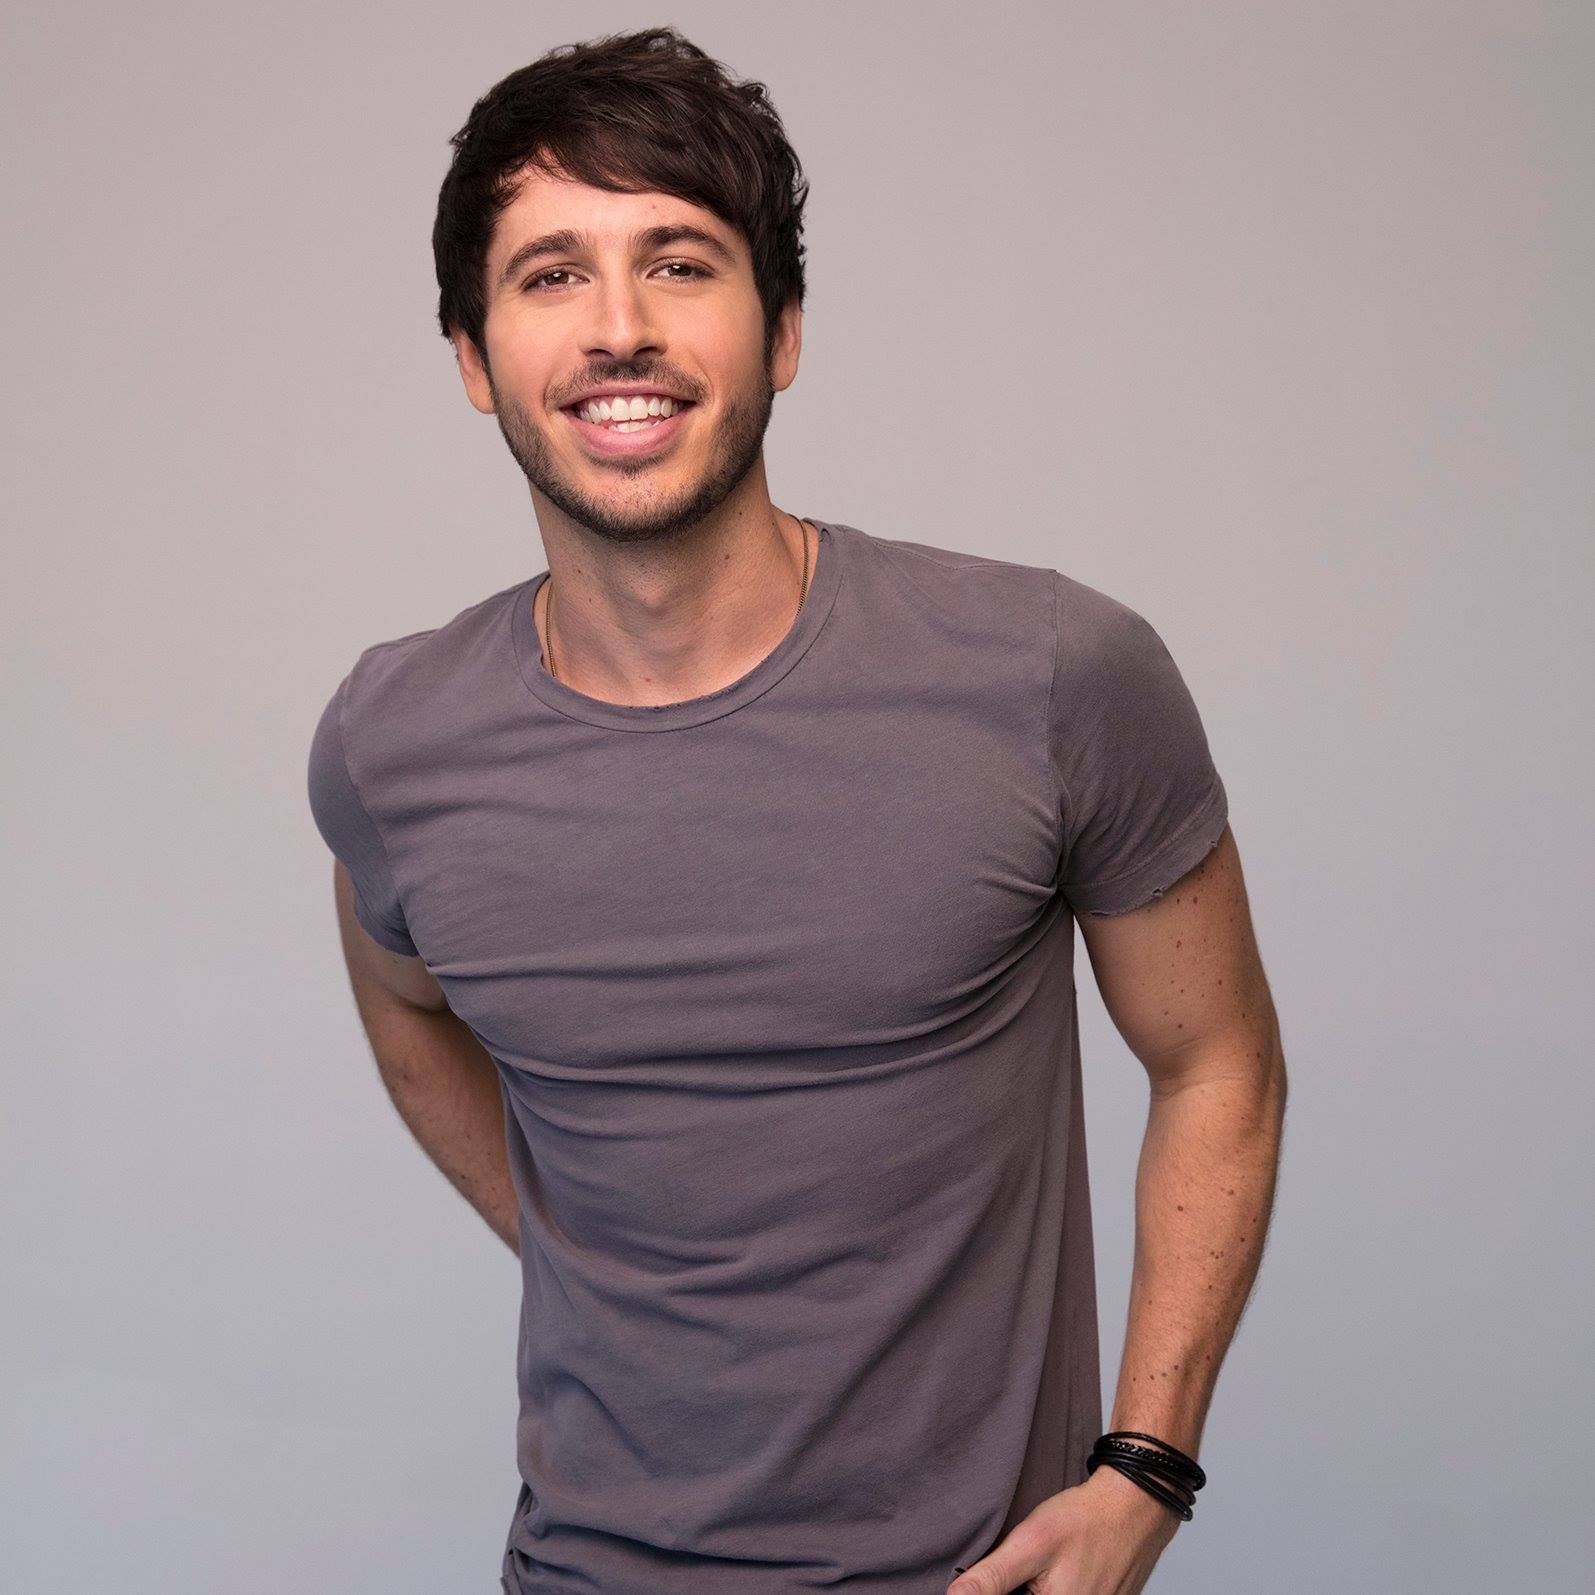 Morgan Evans’ New Music Video Will Make You Want to “Kiss Somebody”